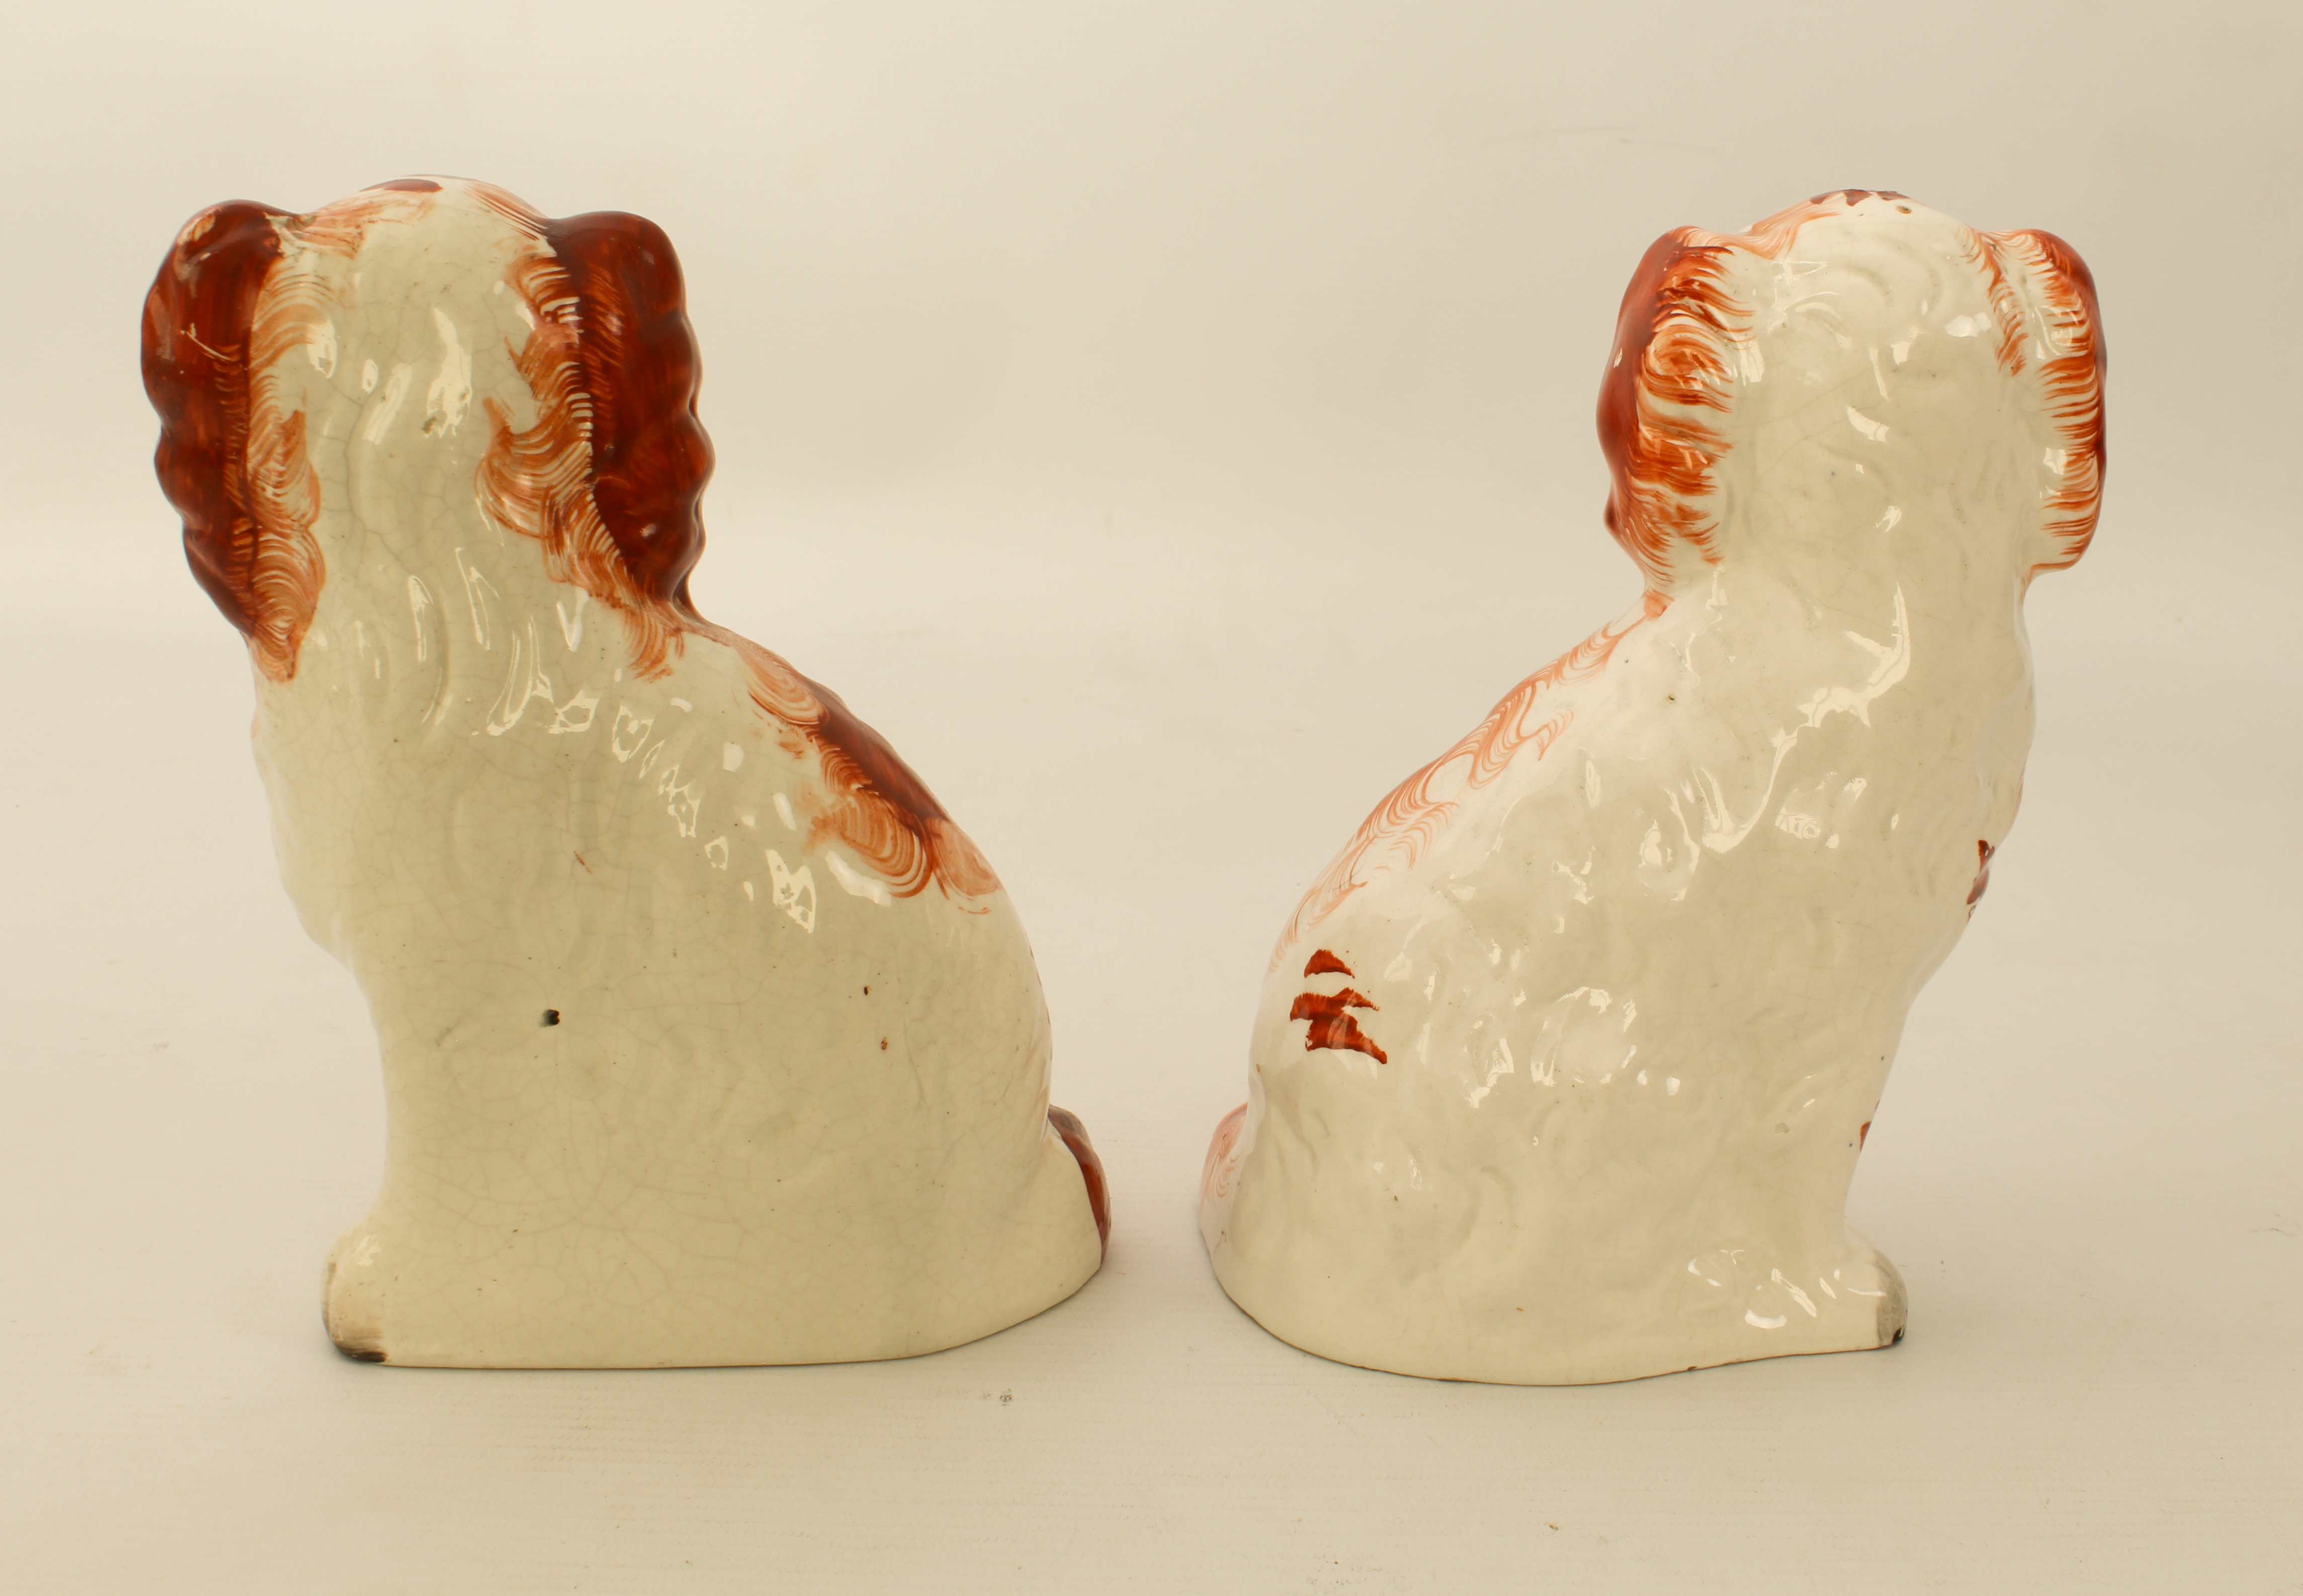 Two 19th century small Staffordshire pottery dogs - 19.2 cm high, one chipped to front paw. - Image 2 of 2